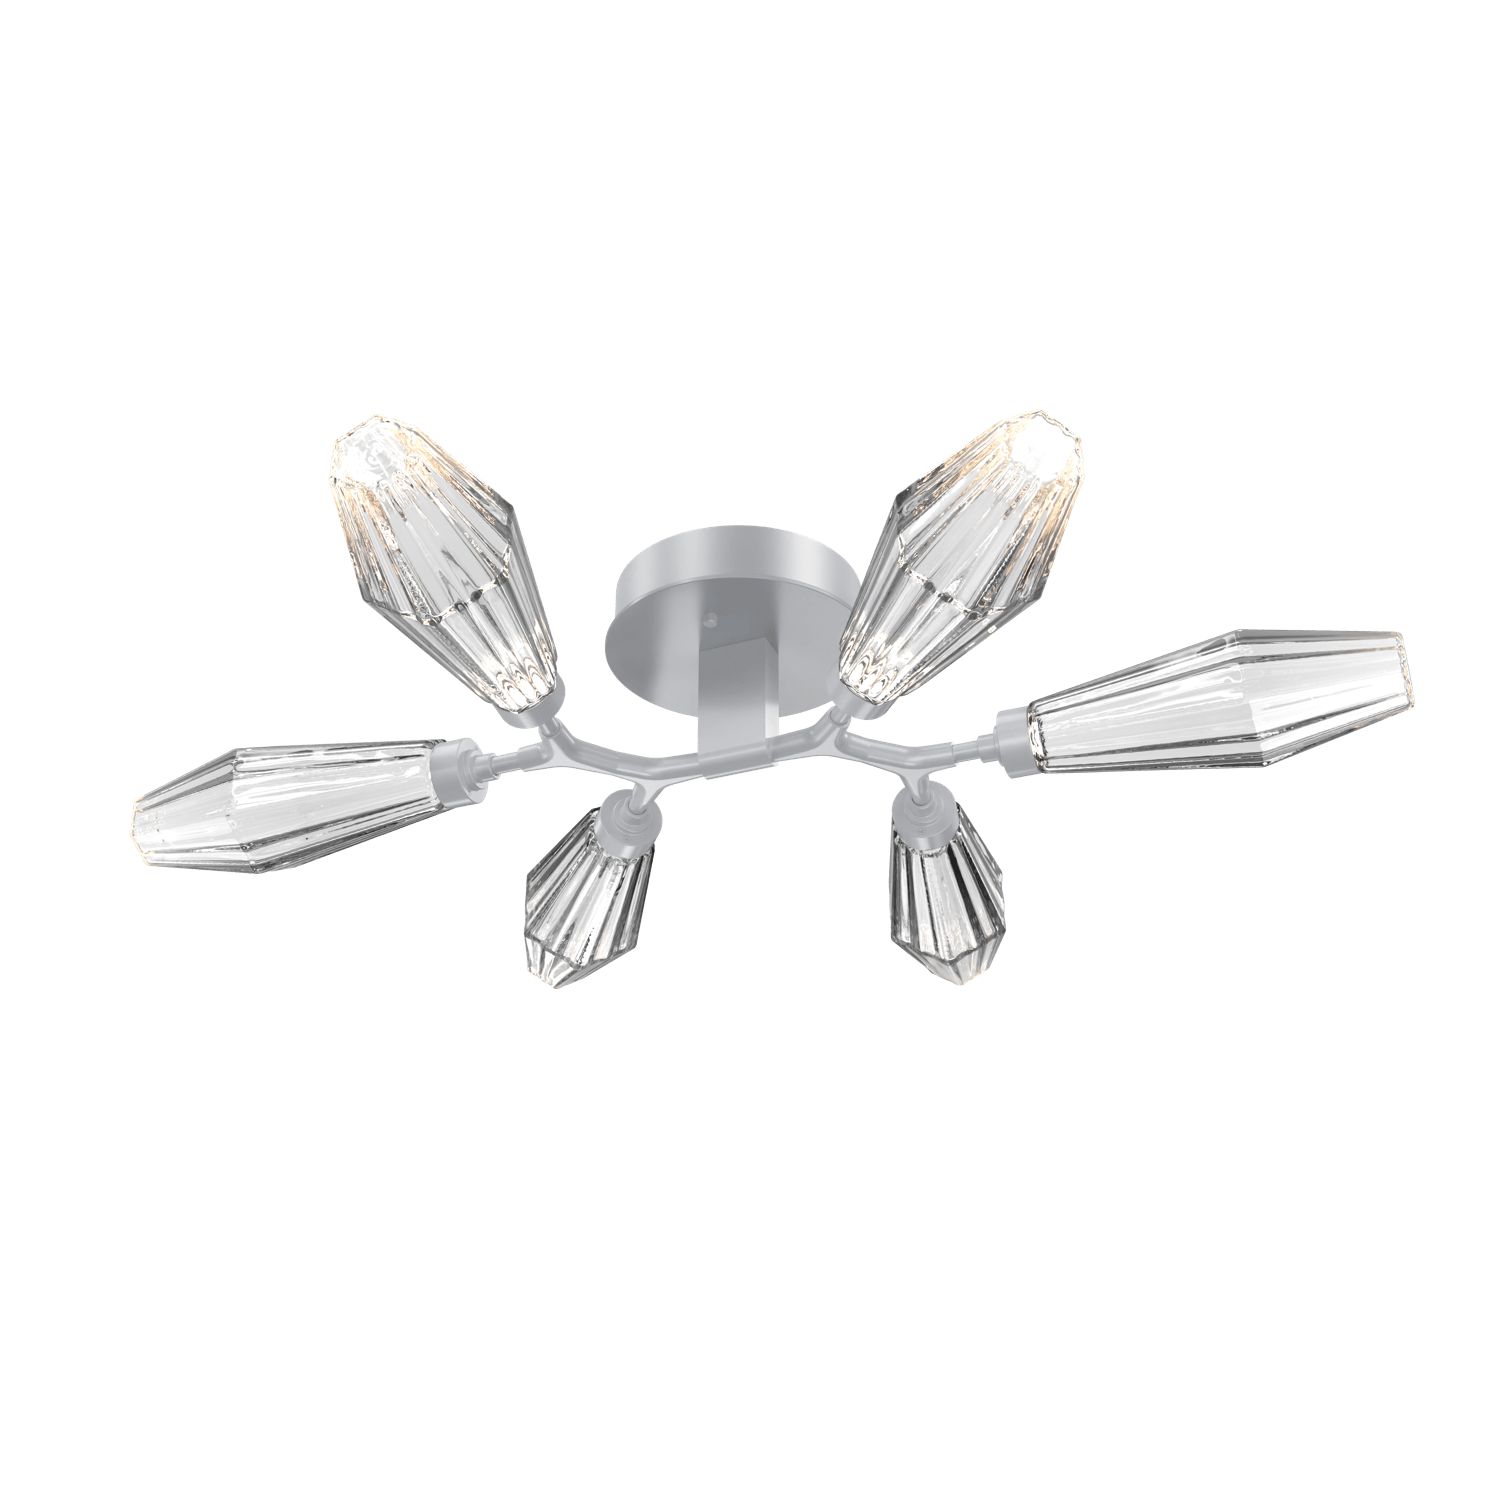 CLB0049-01-CS-RC-Hammerton-Studio-Aalto-6-light-organic-flush-mount-light-with-classic-silver-finish-and-optic-ribbed-clear-glass-shades-and-LED-lamping